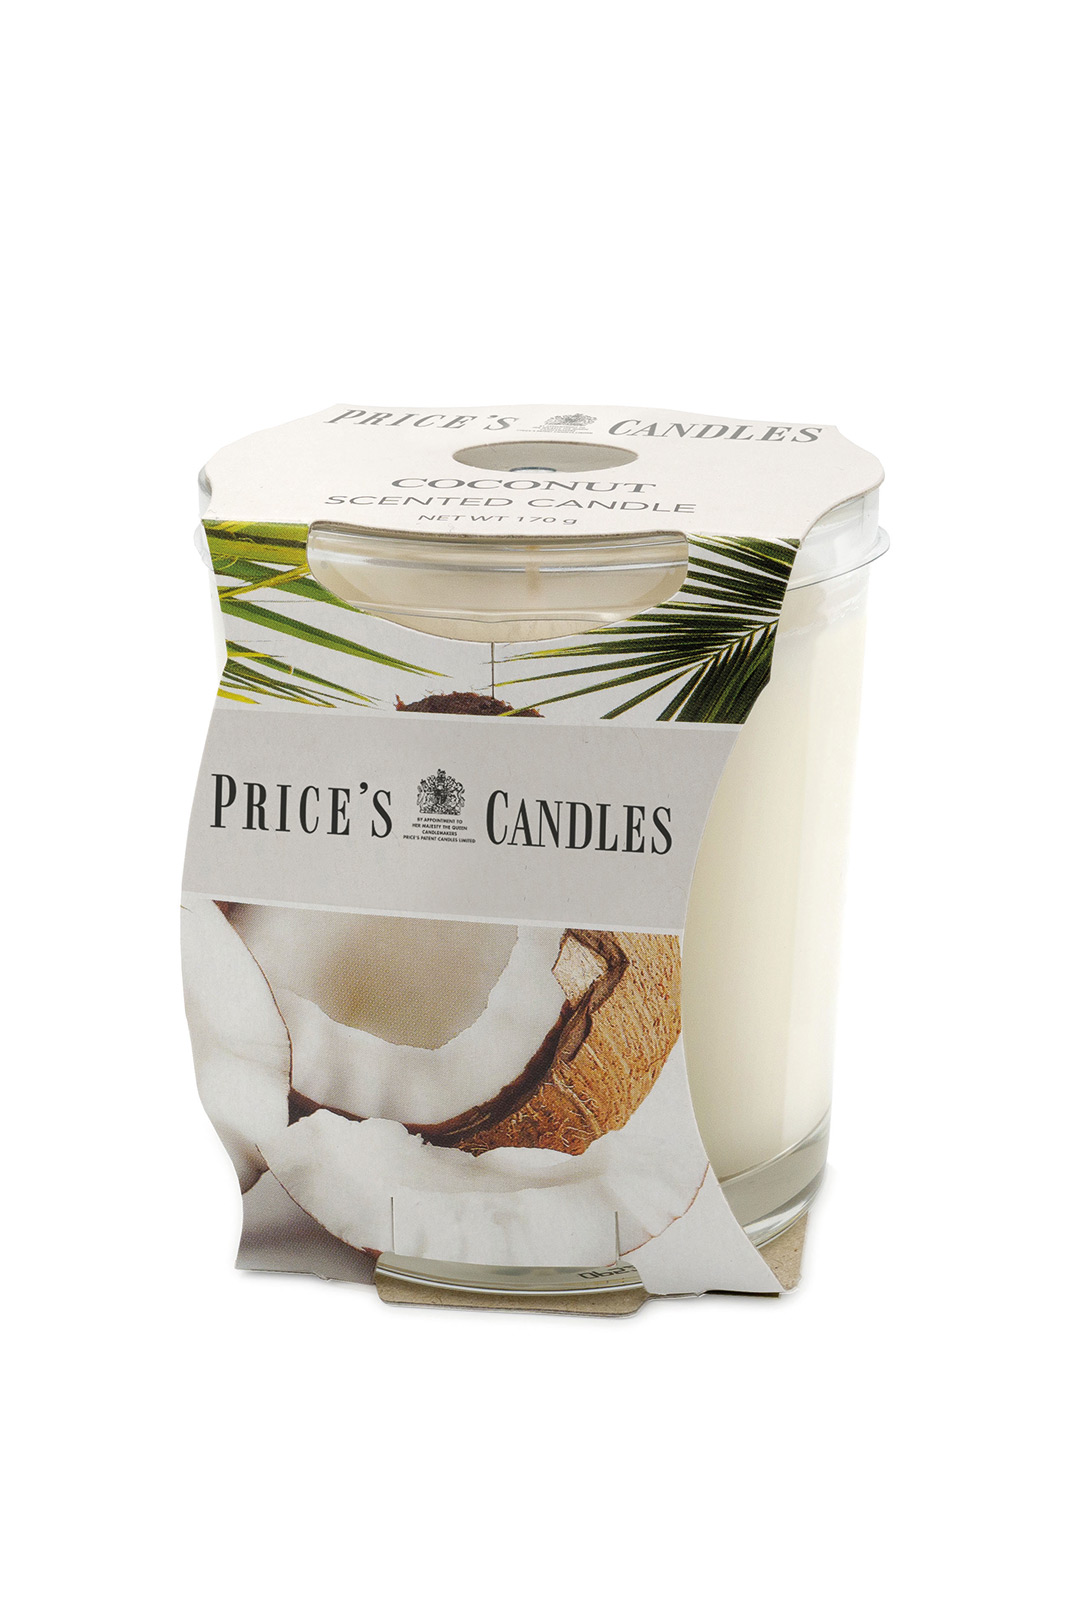 Prices Candle "Coconut" 170g      